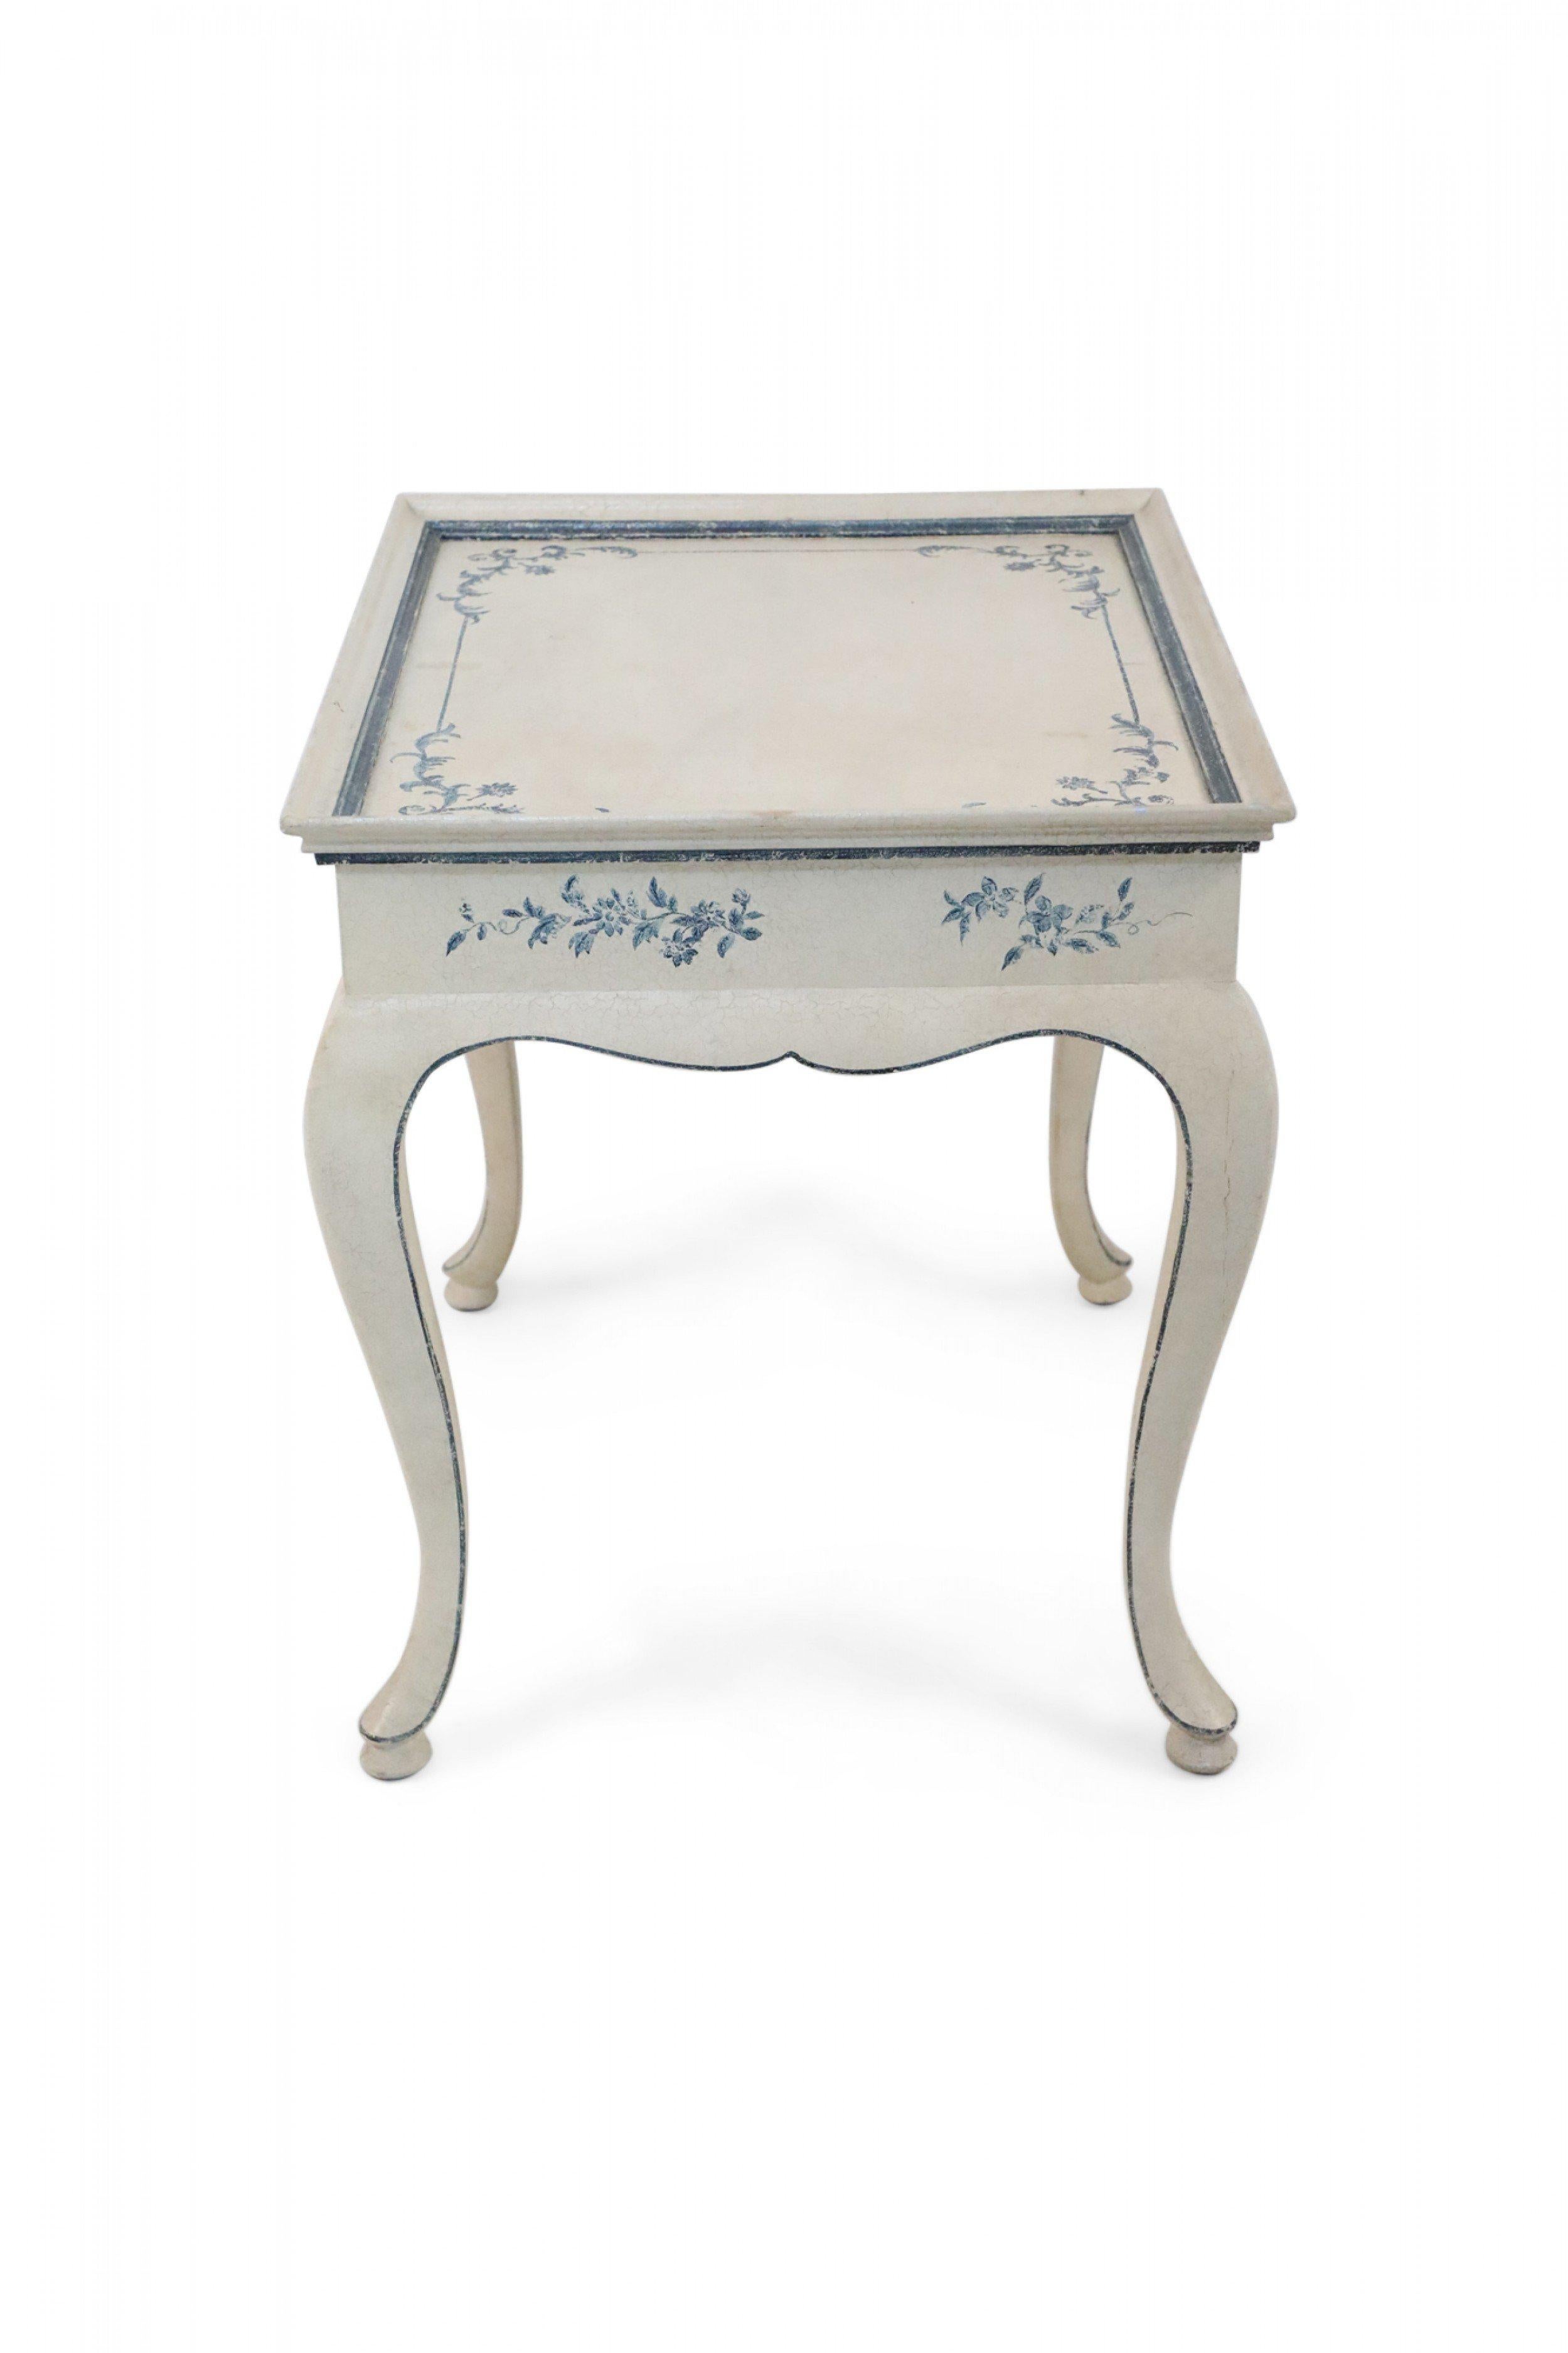 French Provincial-style (modern) cream-colored center table with a faux-distressed finish and scalloped apron and cabriole legs that are traced with a thin blue line, matching blue floral designs detailed along the top and all sides.
  